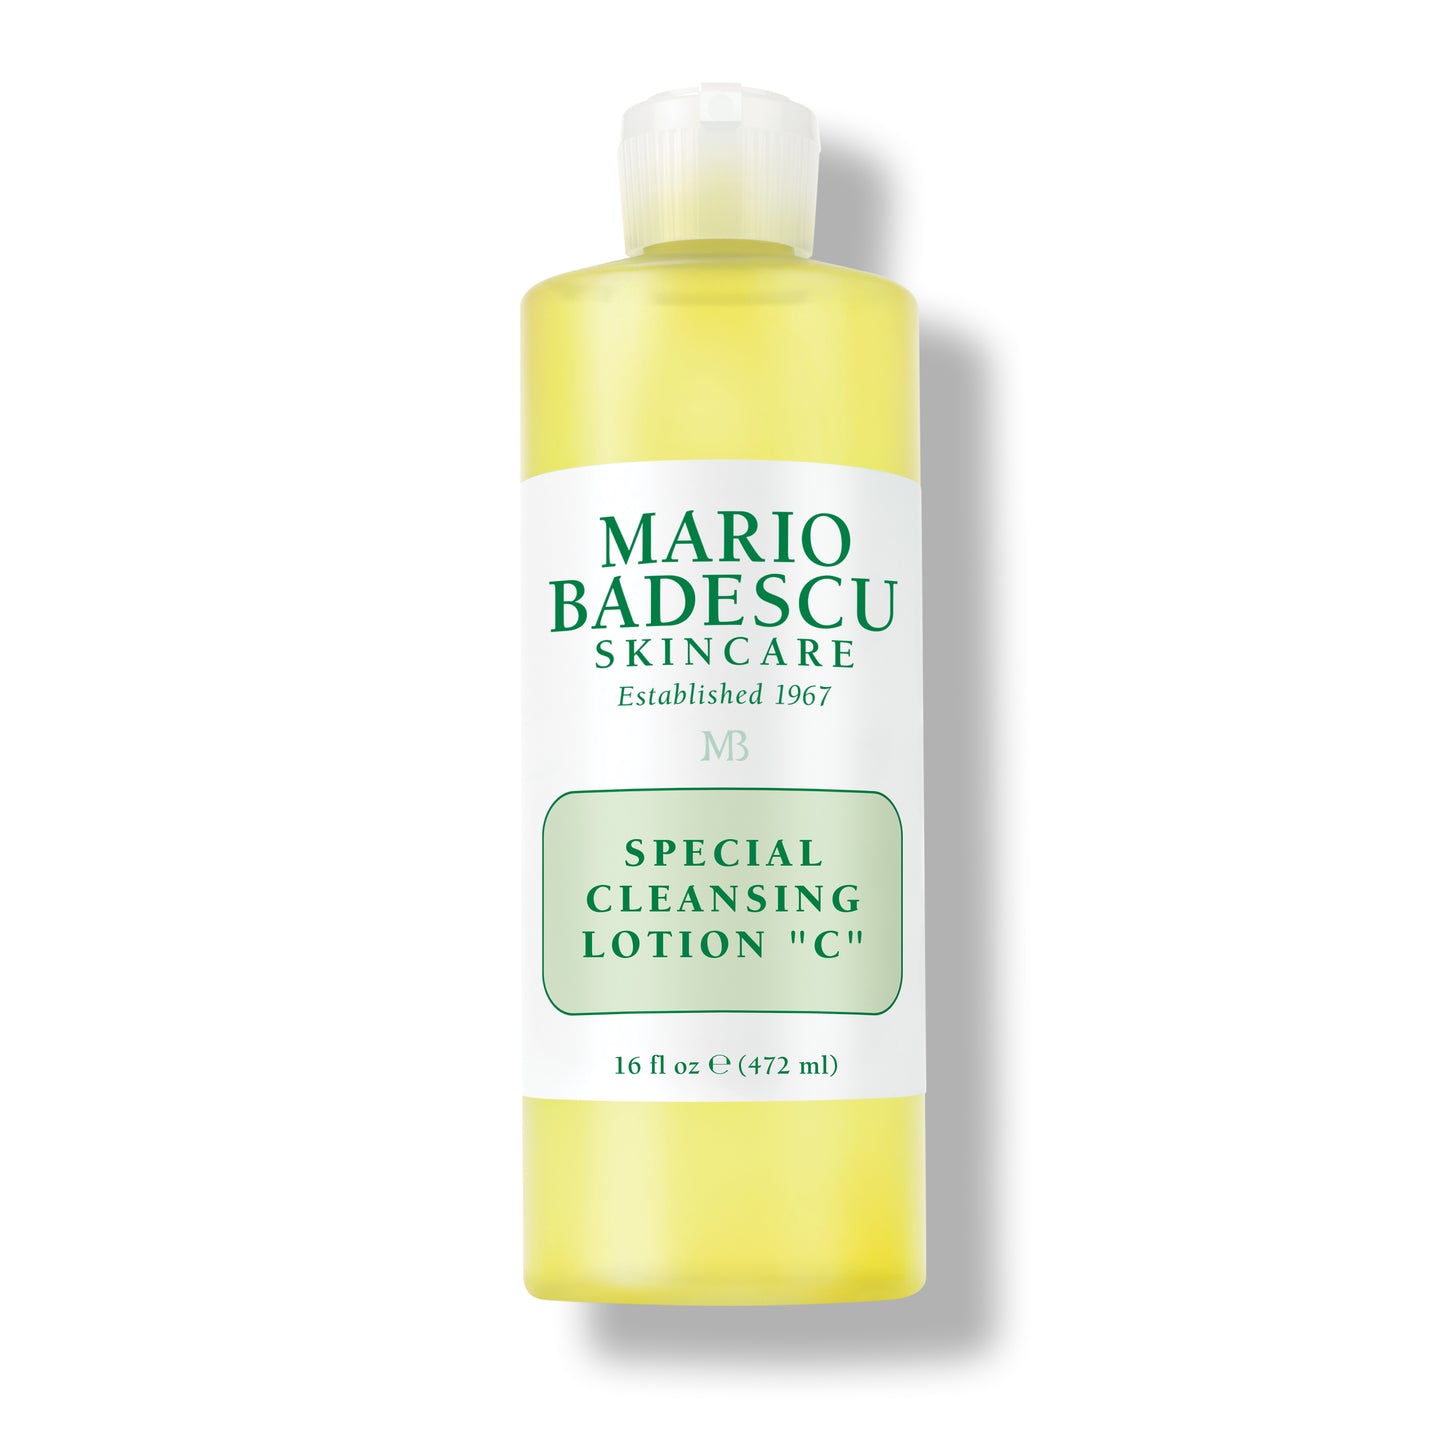 Special Cleansing Lotion "C"  Toner